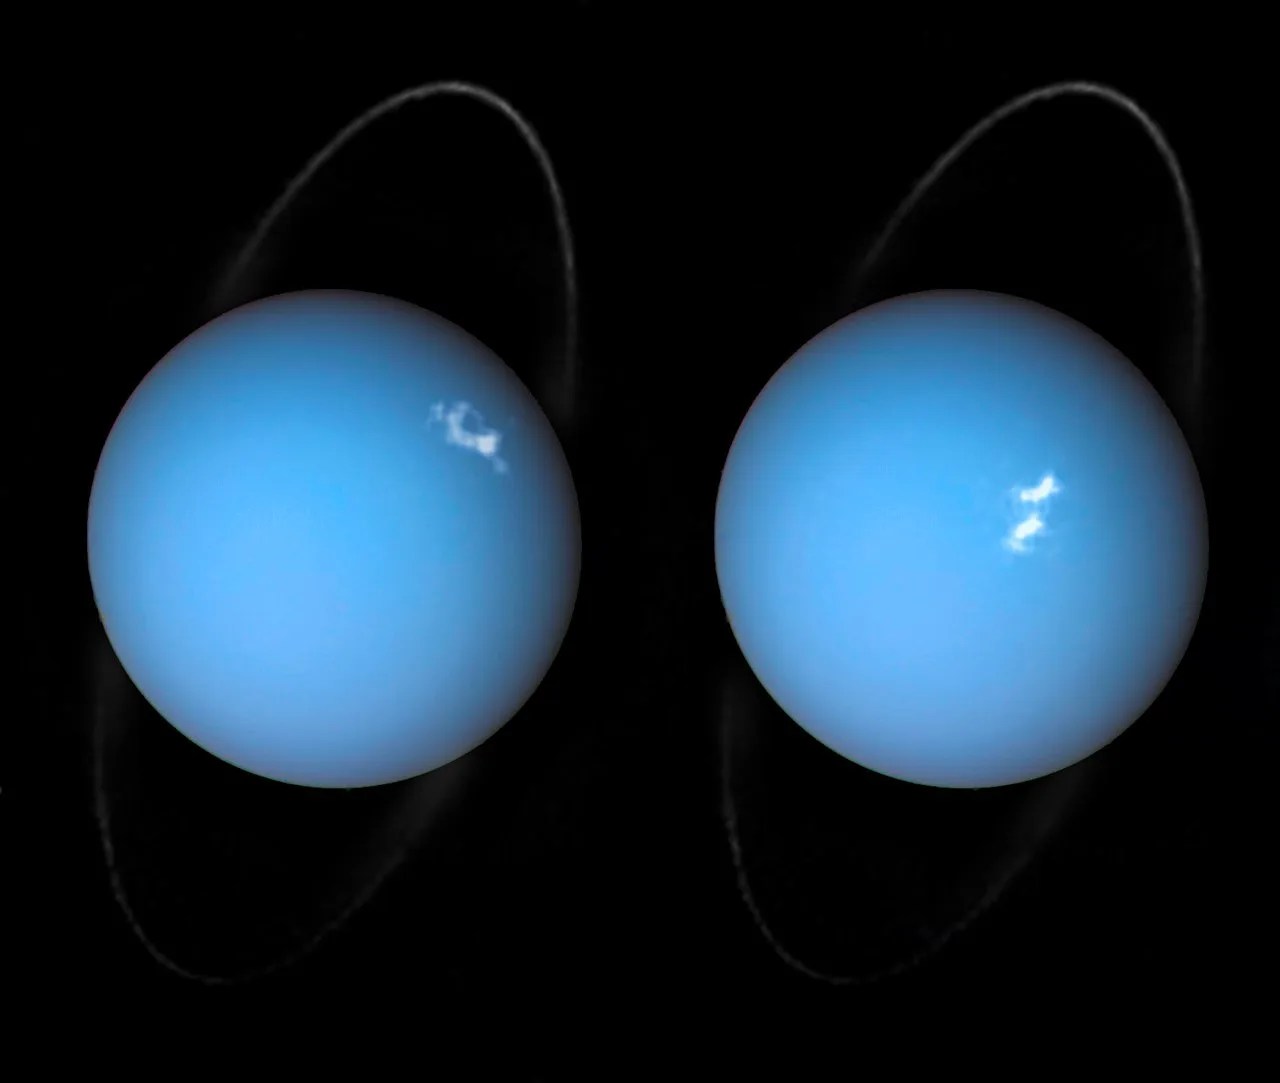 Double image of blue planet